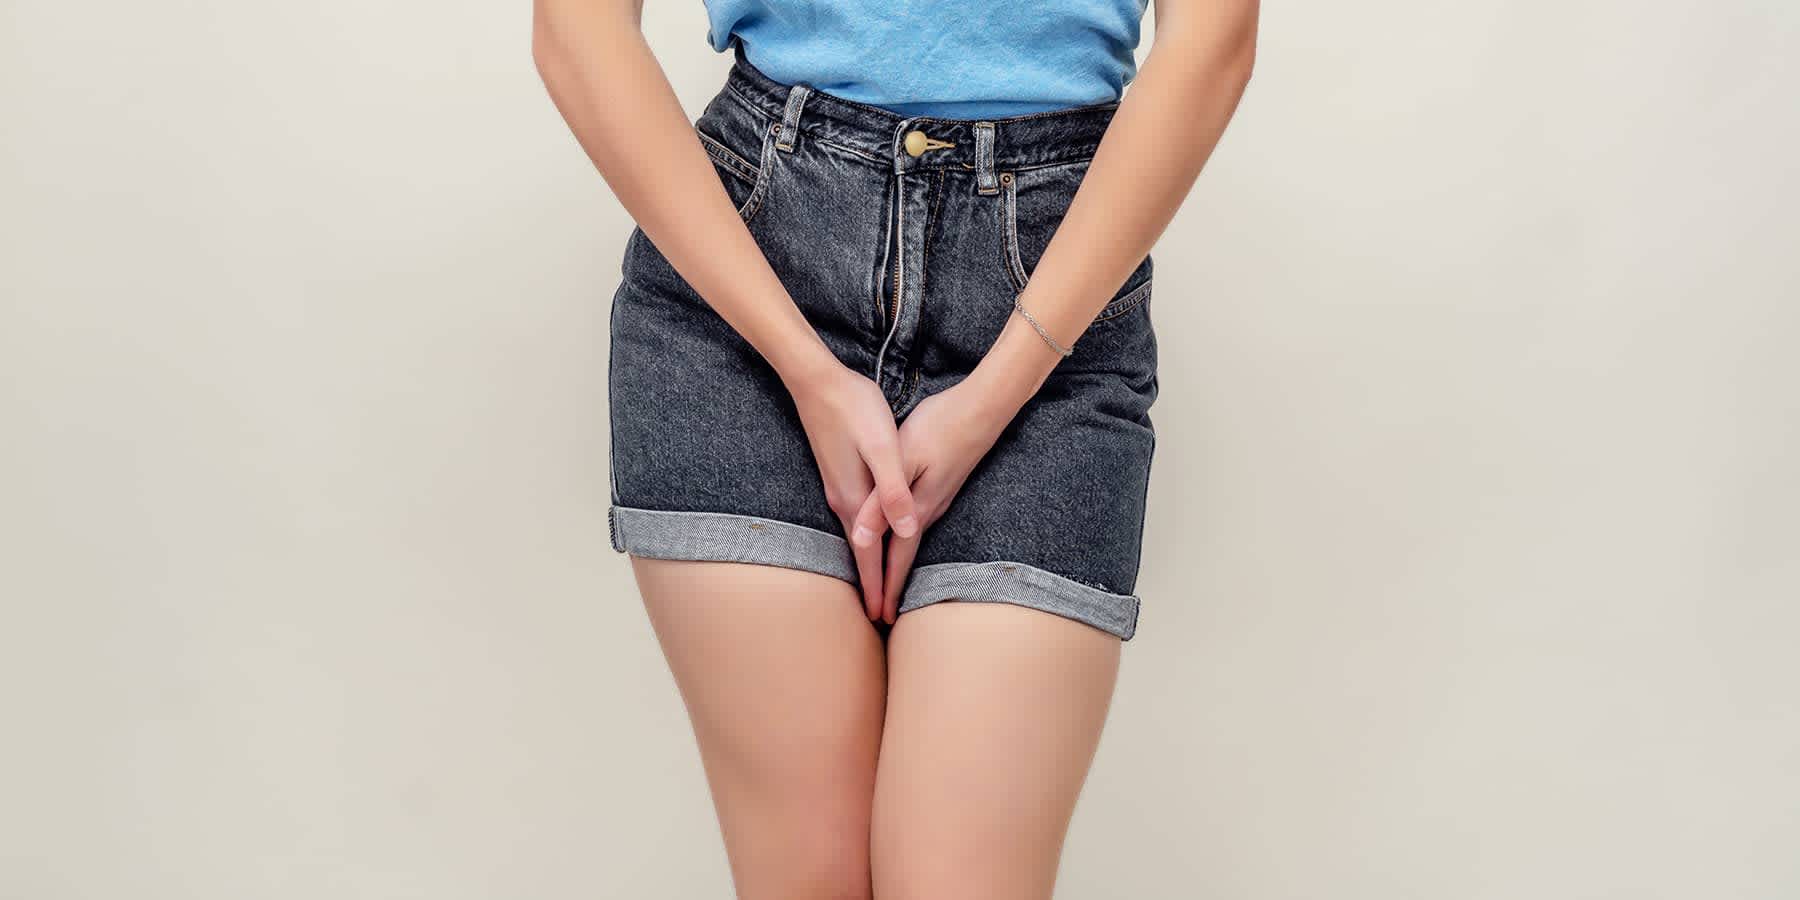 Young woman in shorts wondering if it is safe to have sex during your period